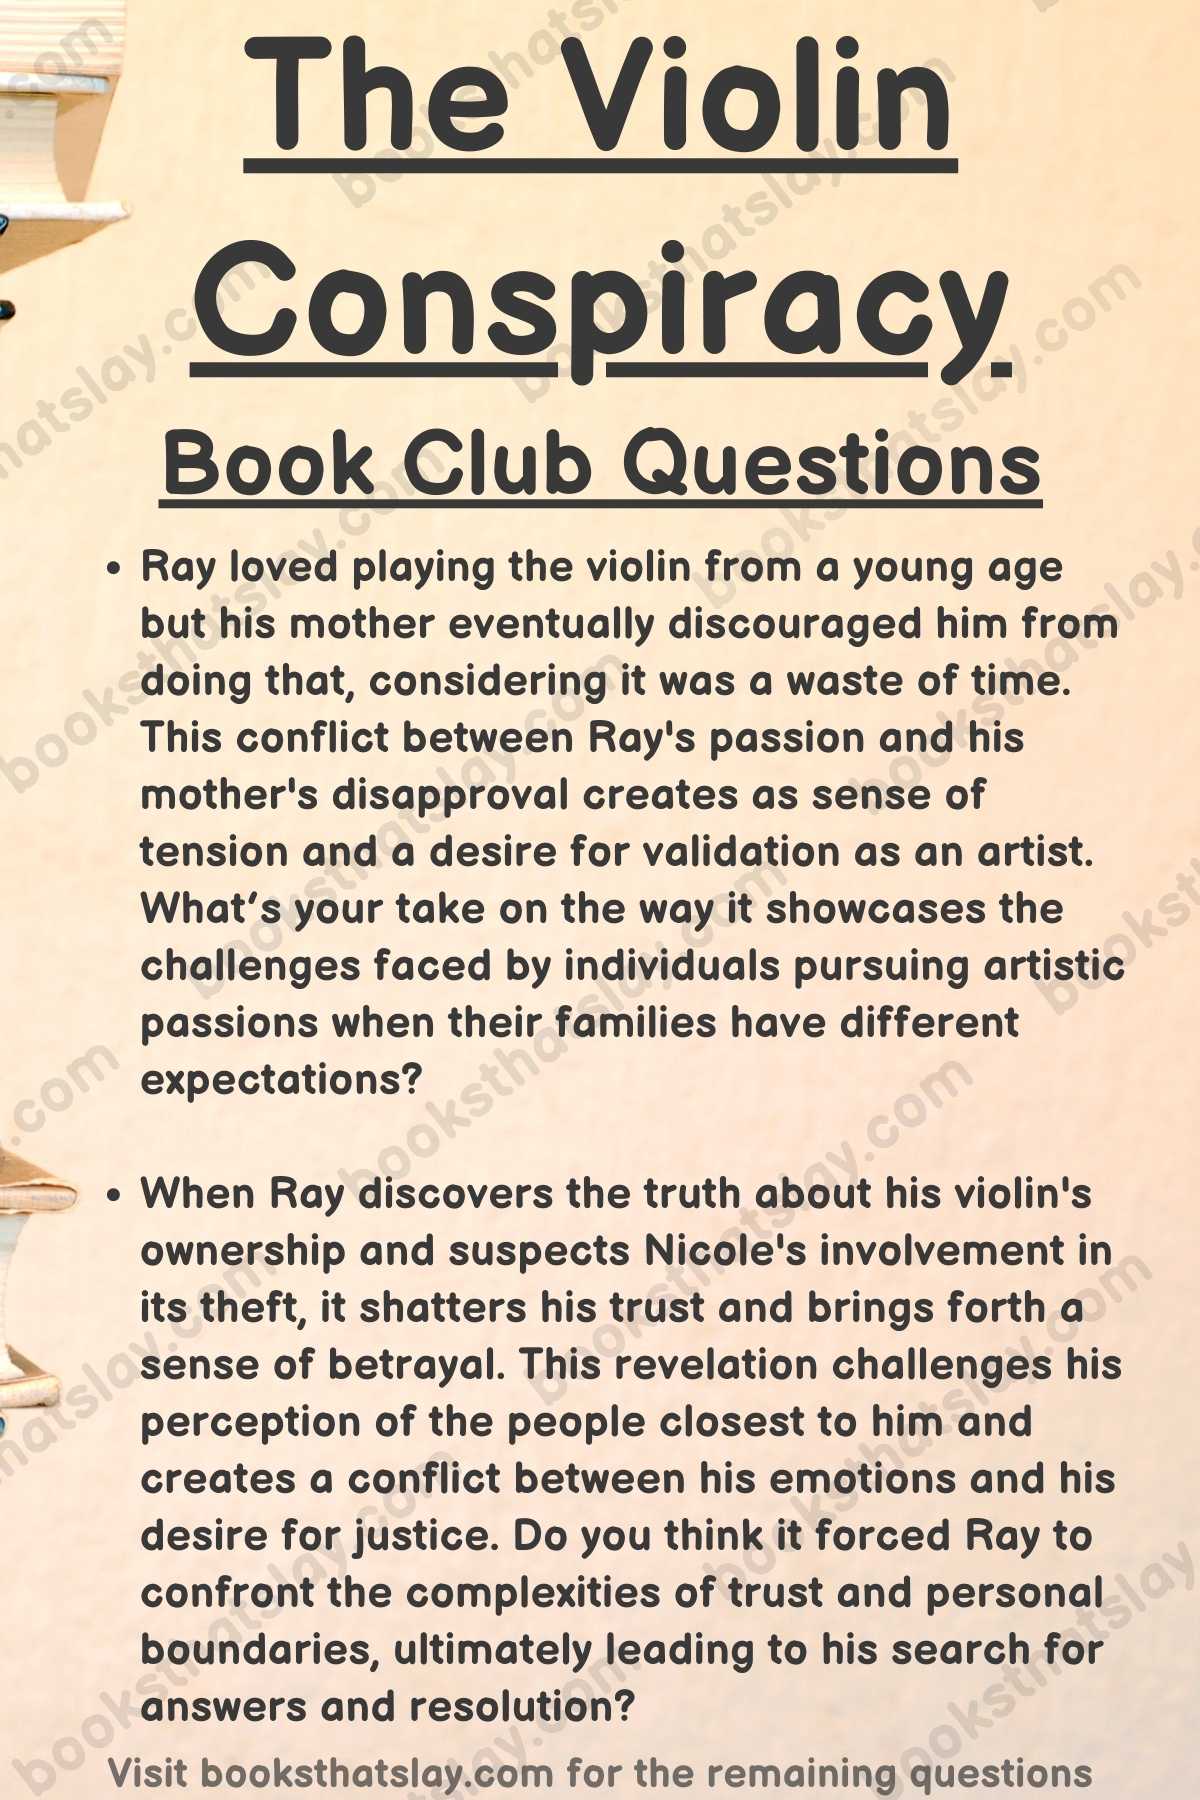 The Violin Conspiracy Book Club Questions
